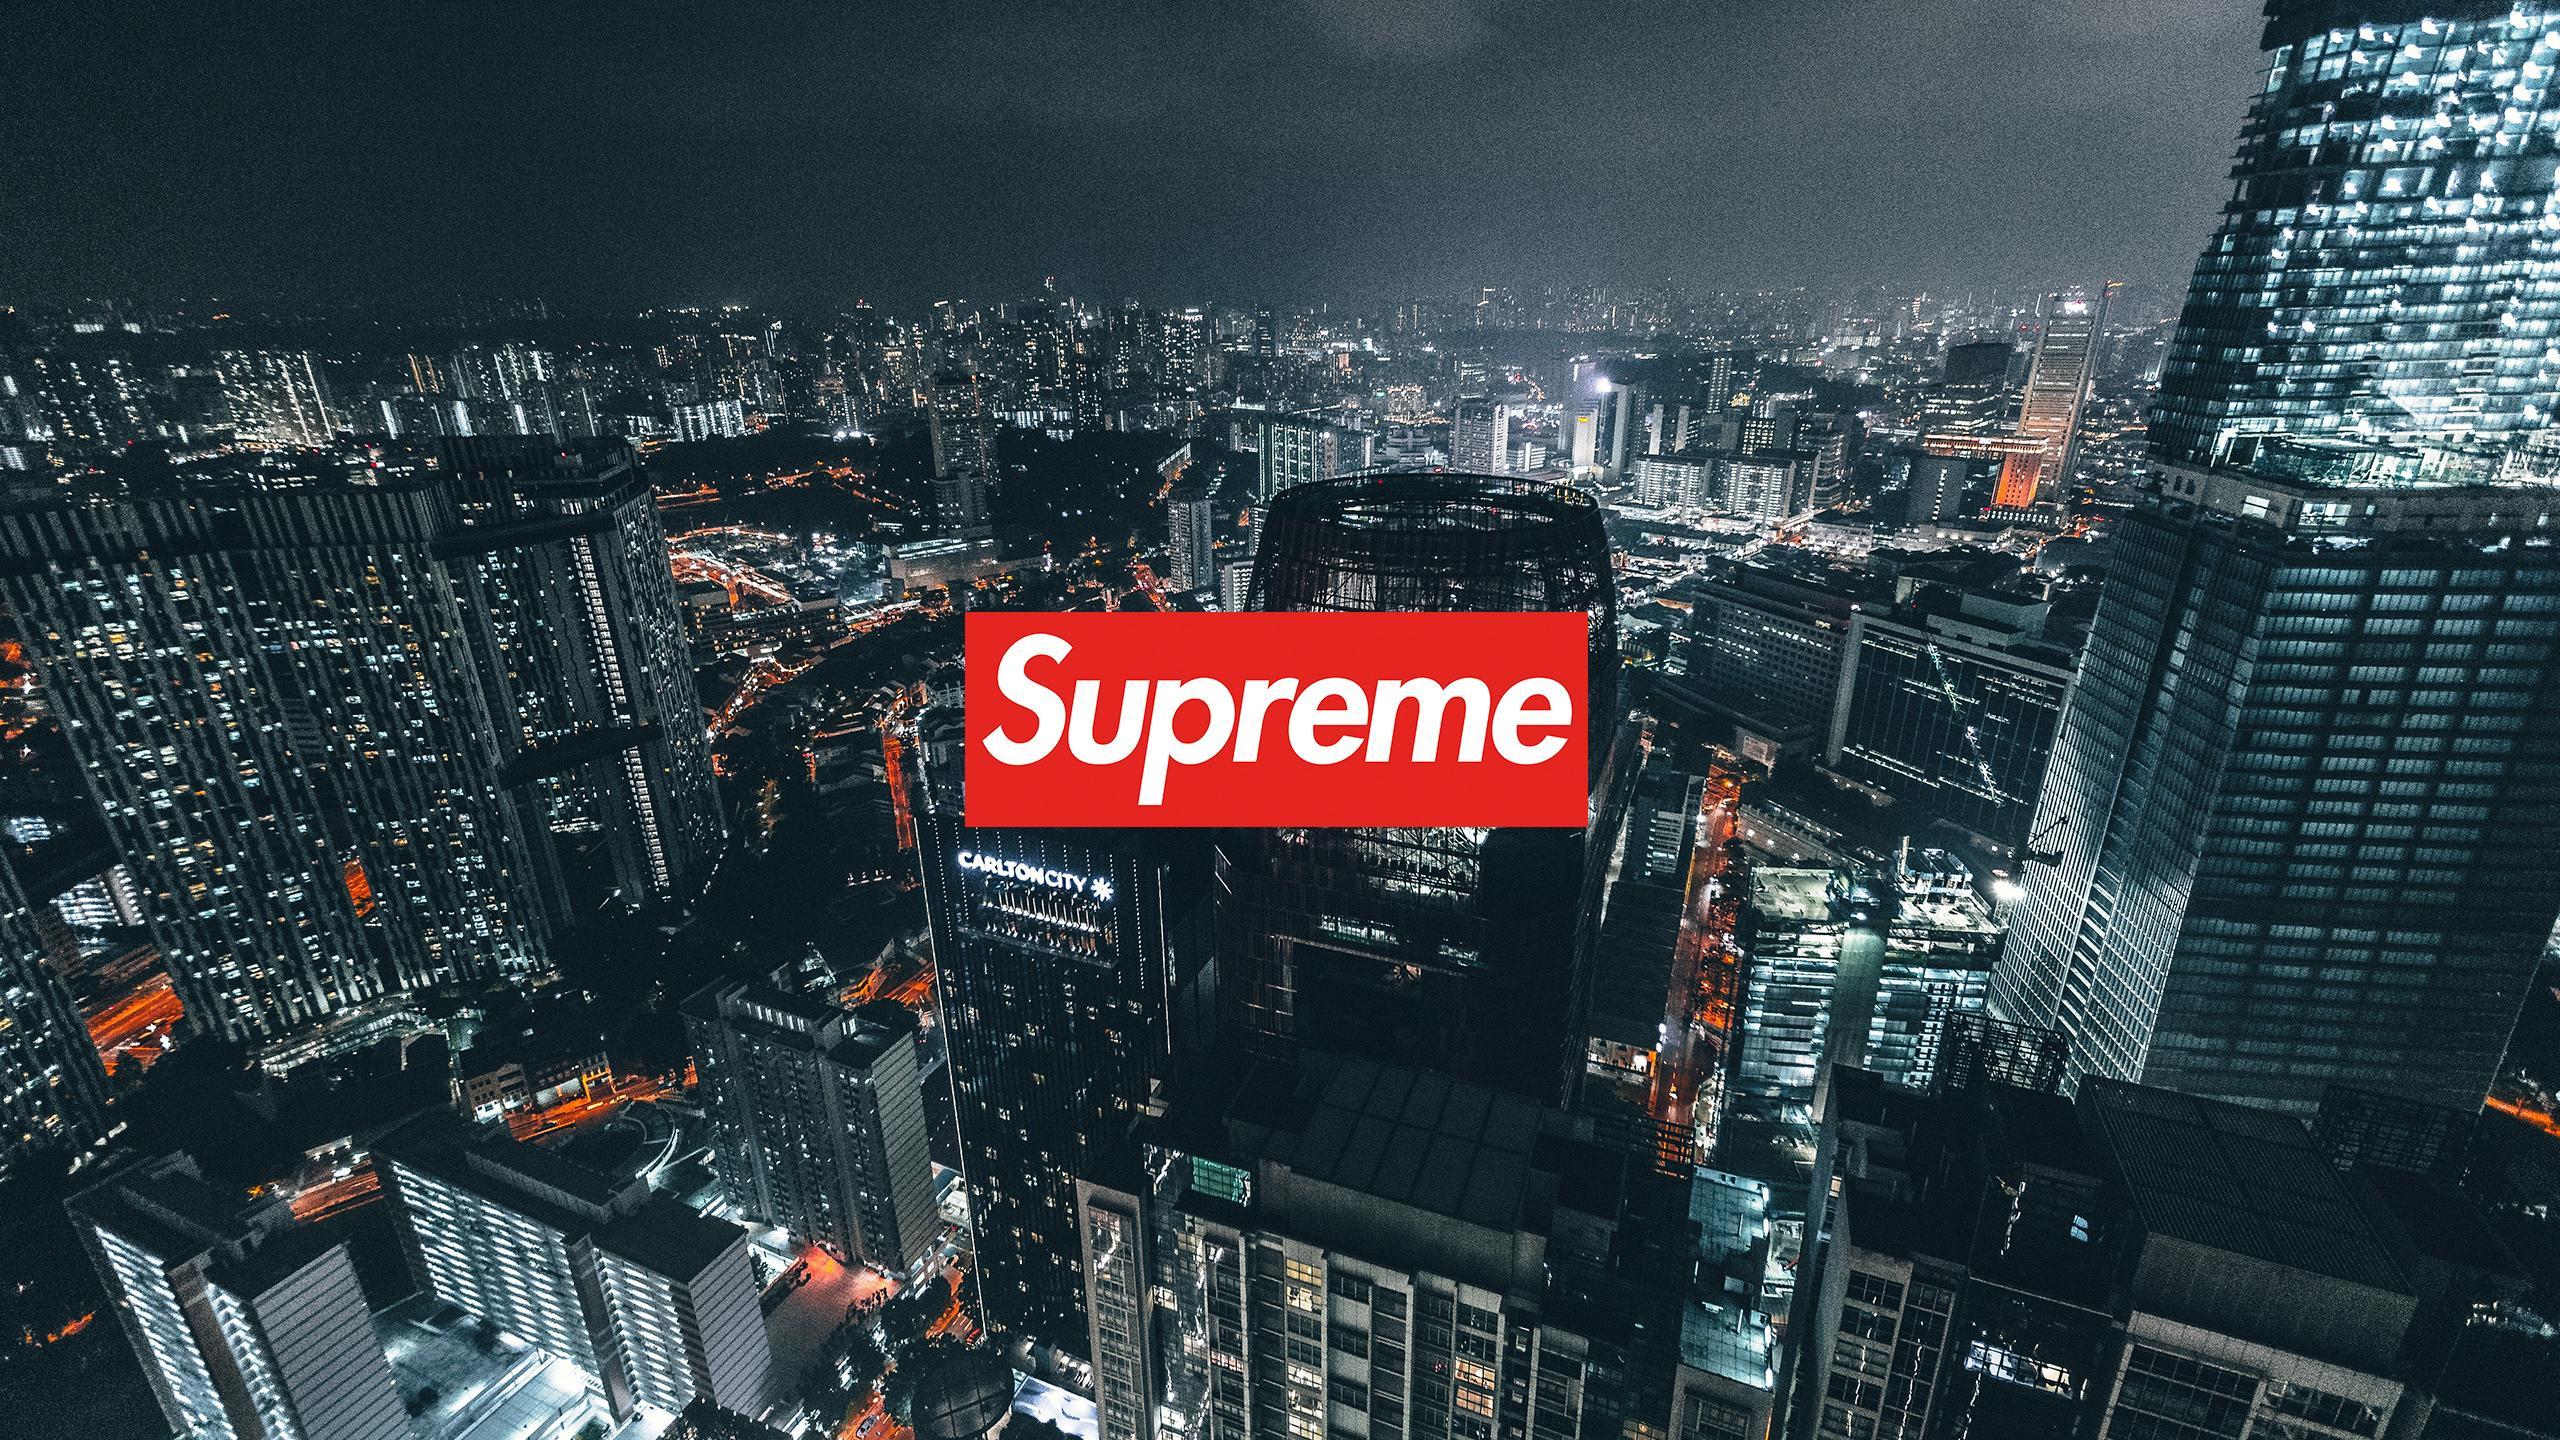 Download The Supreme Nightscape Wallpapers Below For